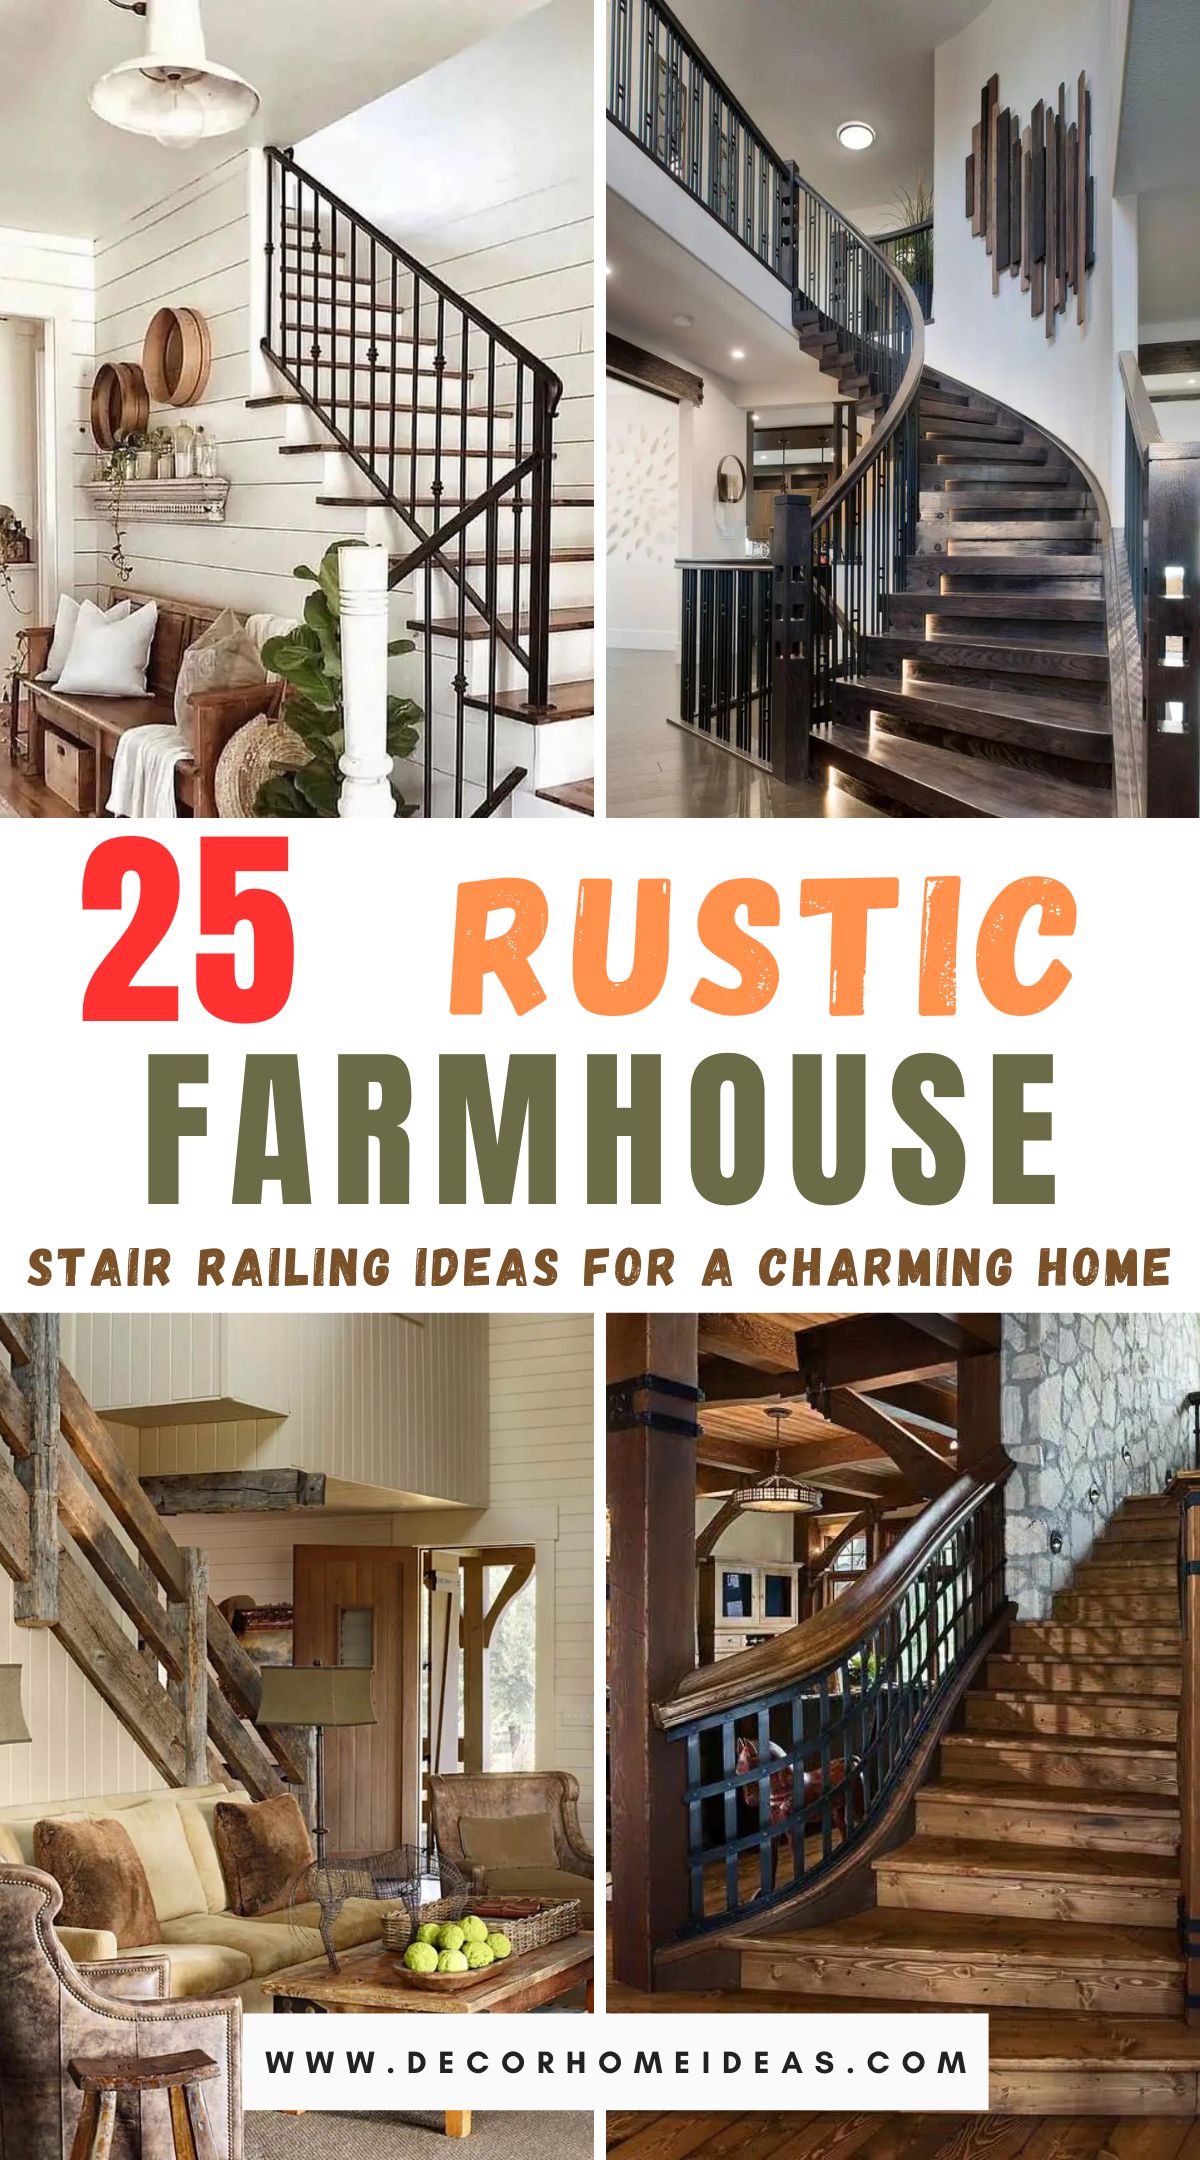 Enhance your home's appeal with these 25 charming farmhouse rustic stair railing ideas. Explore creative and rustic design inspirations that add character and warmth to your staircase, making it a standout feature in your home.